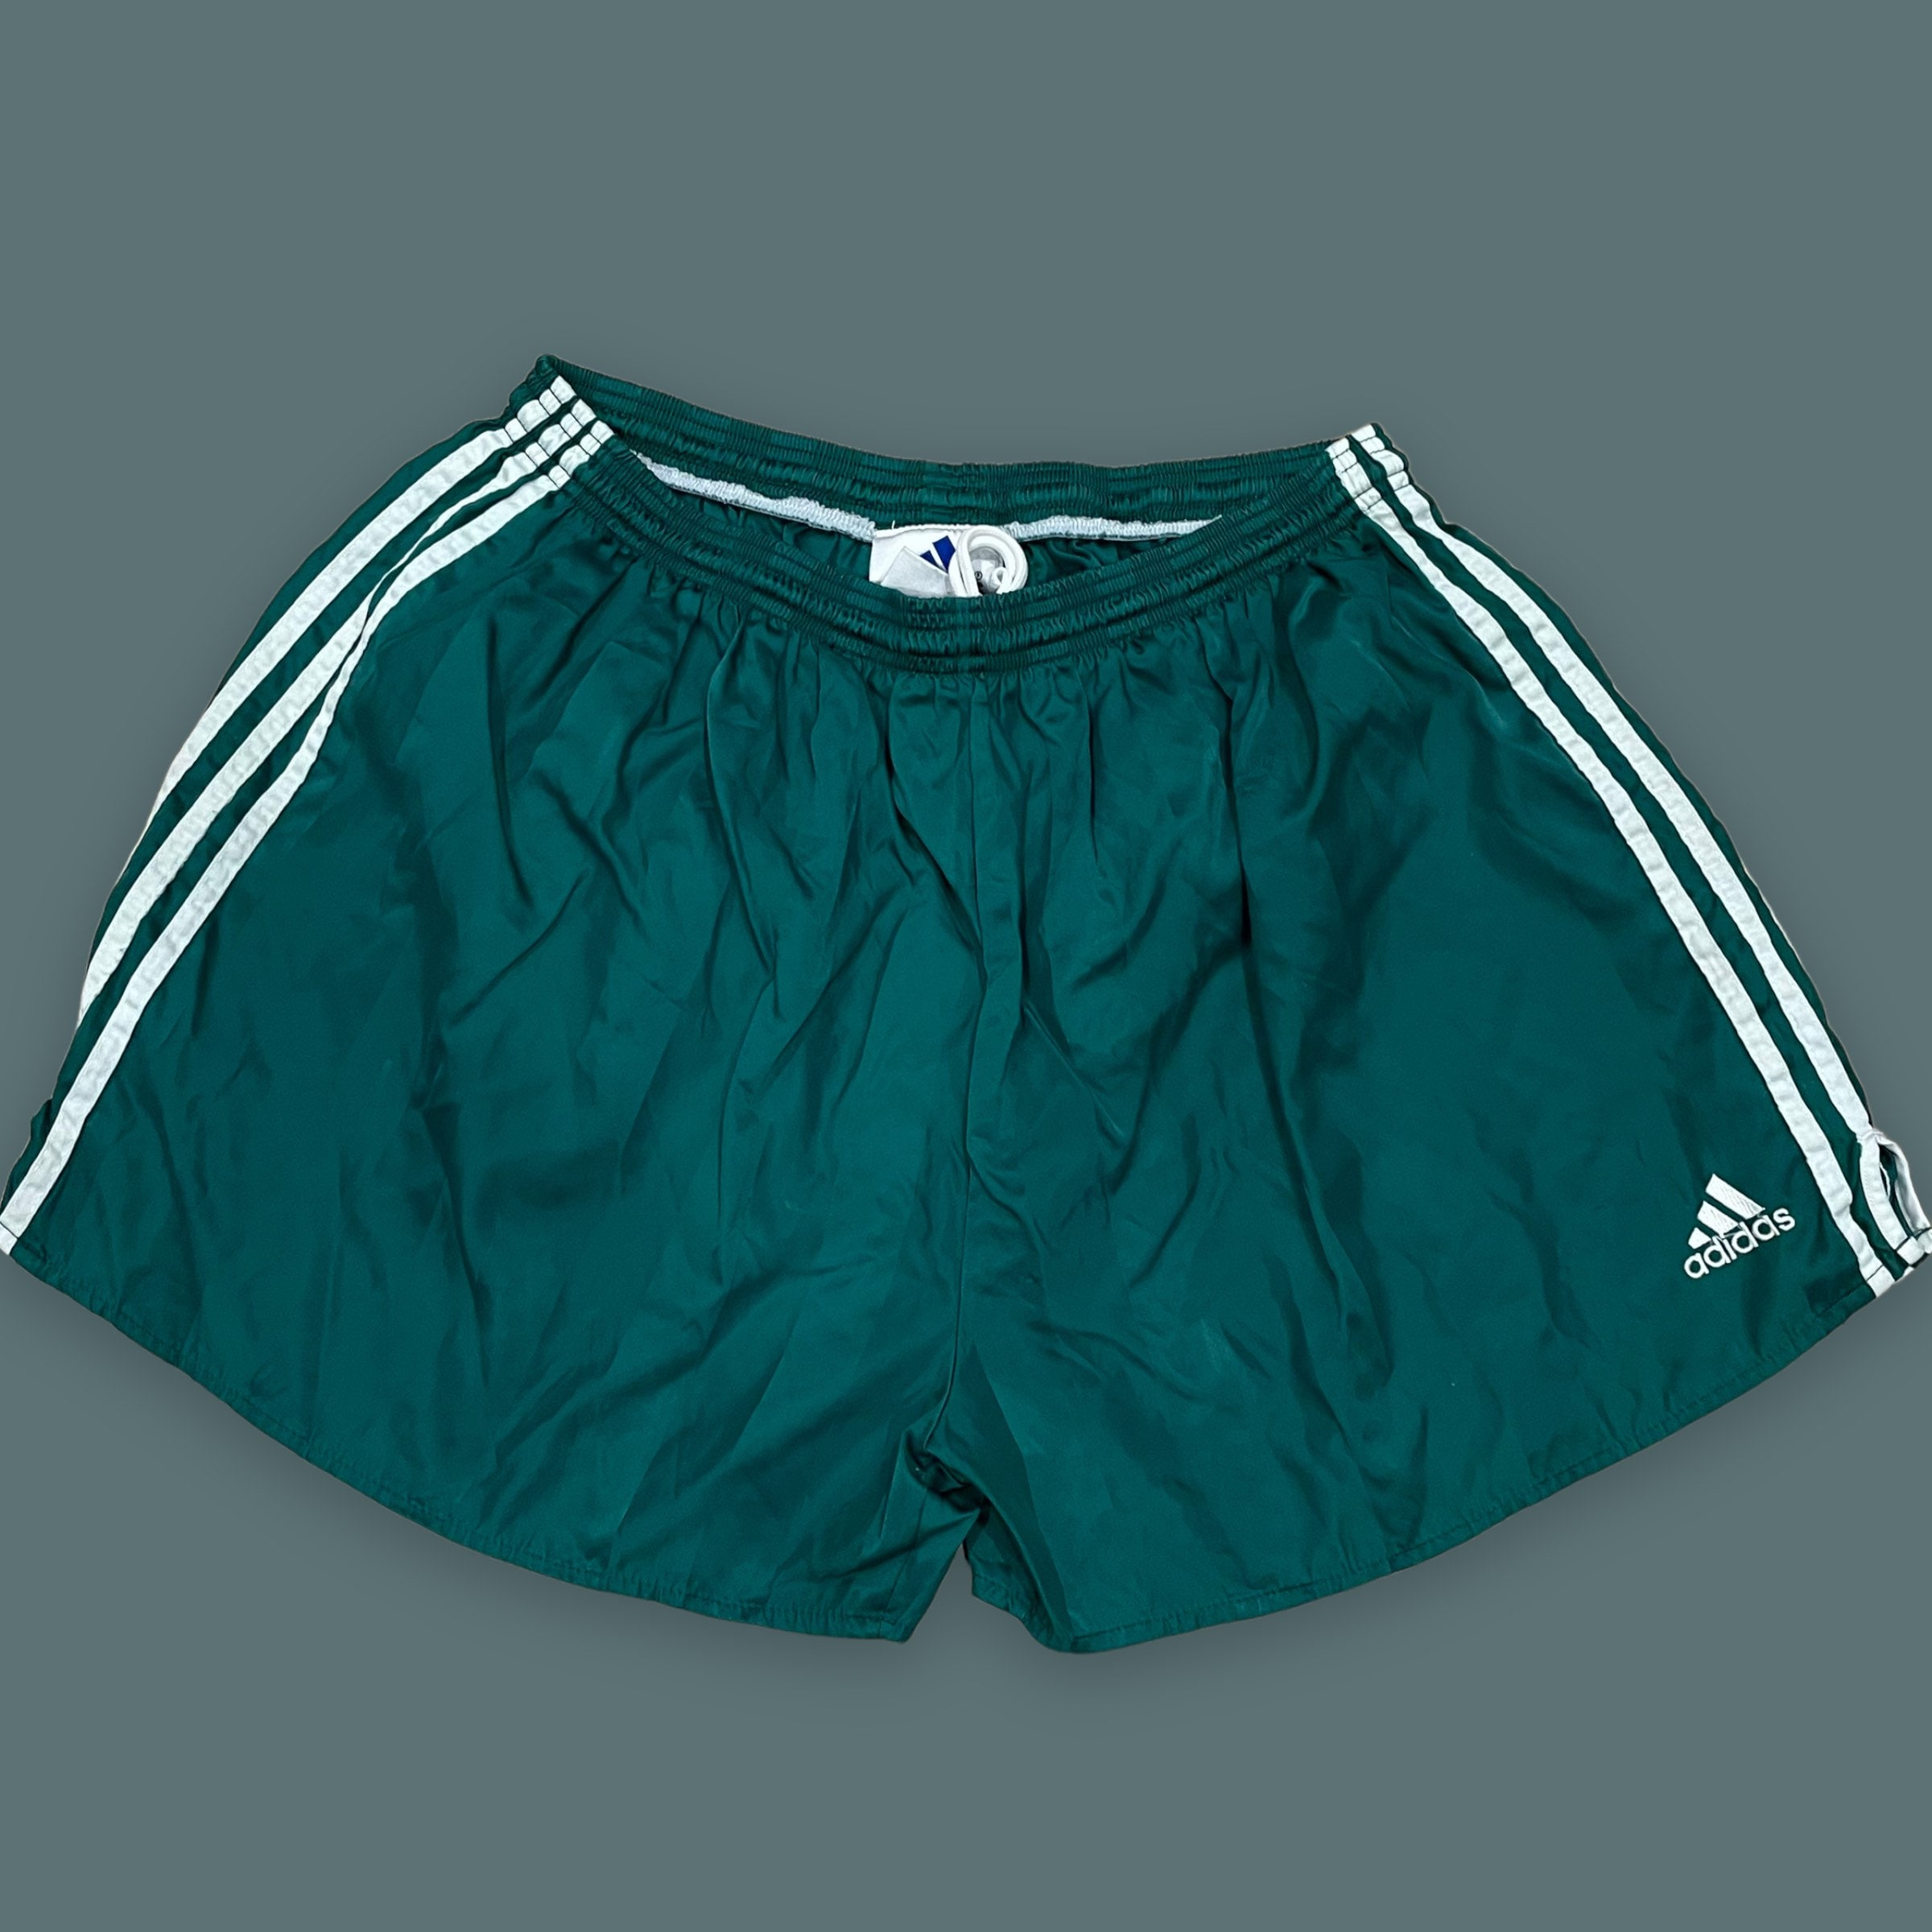 Vintage 90s Adidas Shorts/ Pine Green/ Style L - Etsy